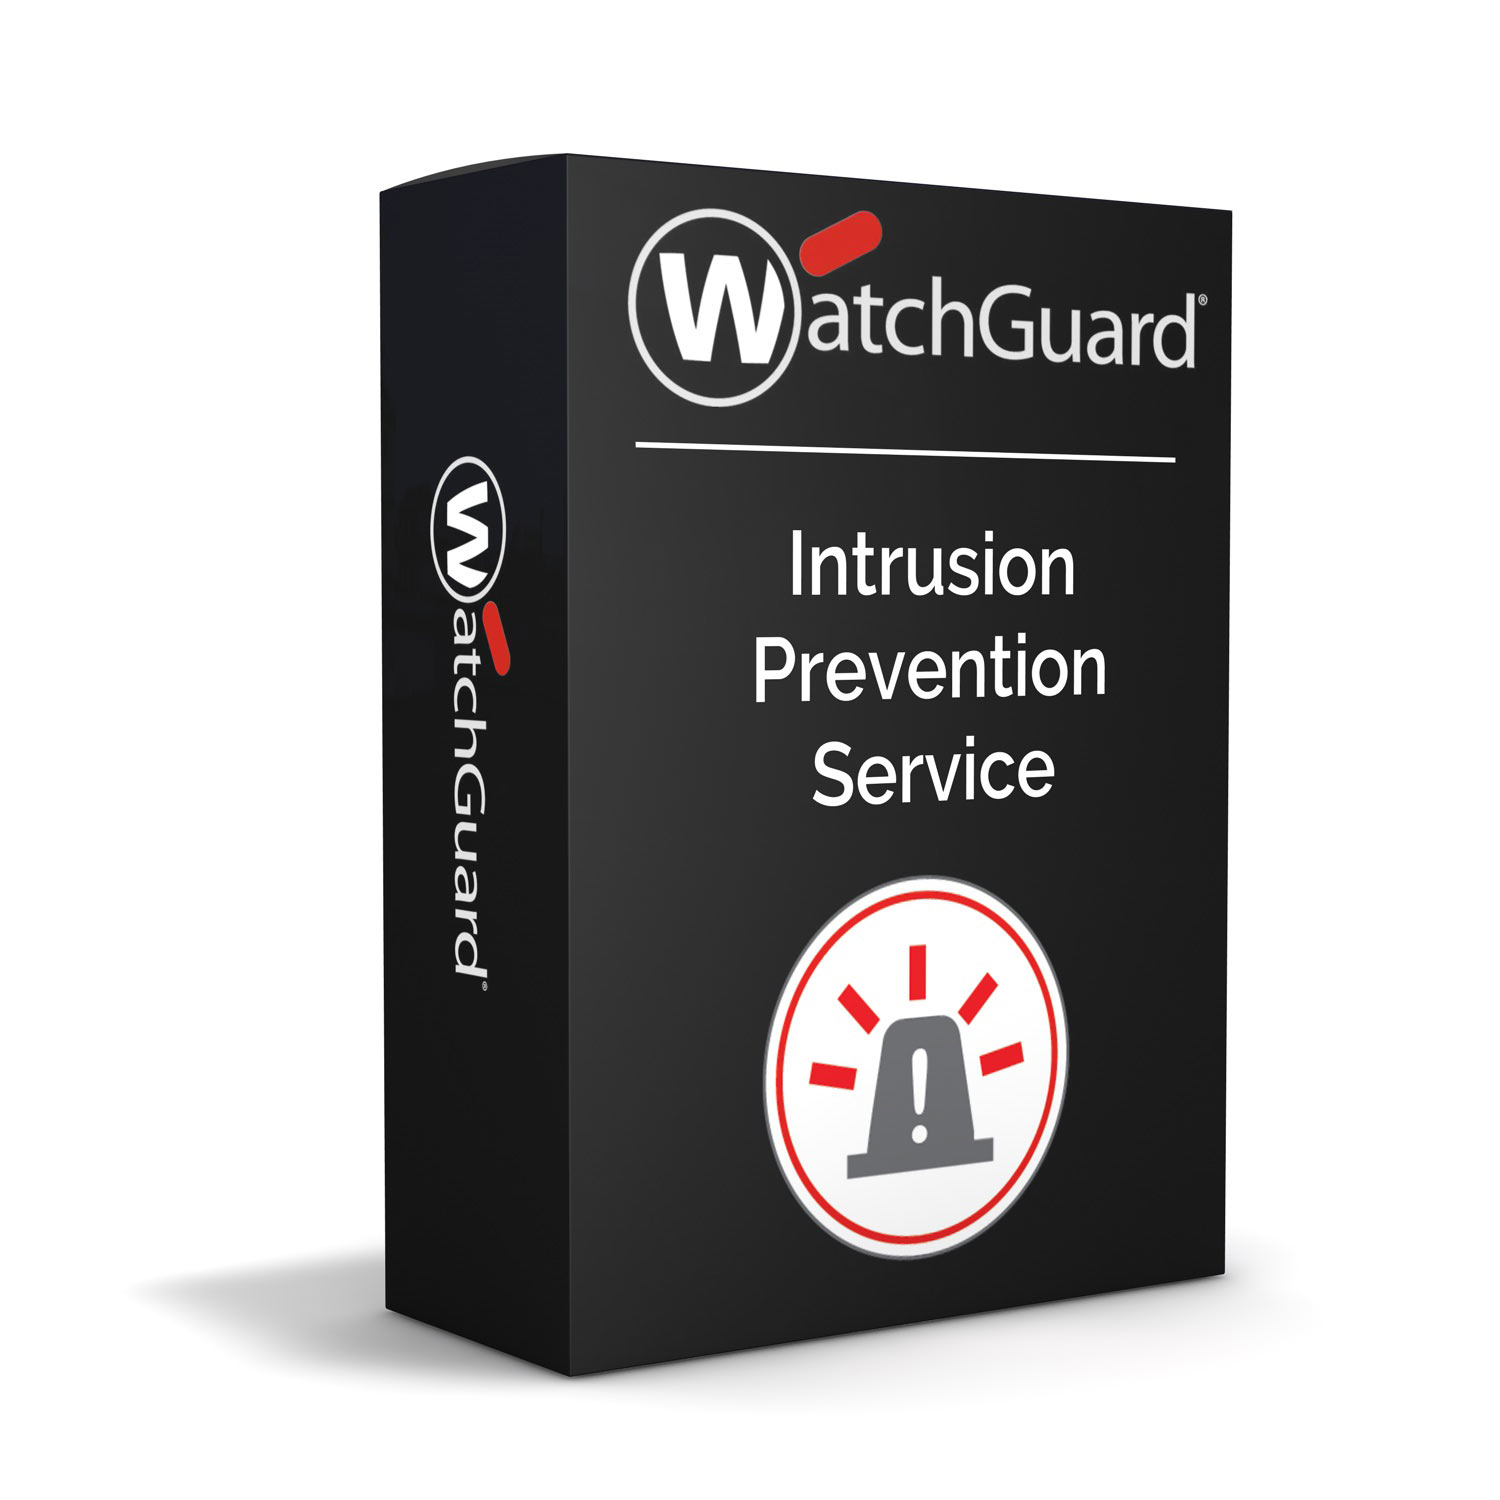 WatchGuard Intrusion Prevention Service 1-yr for Firebox T10 Models